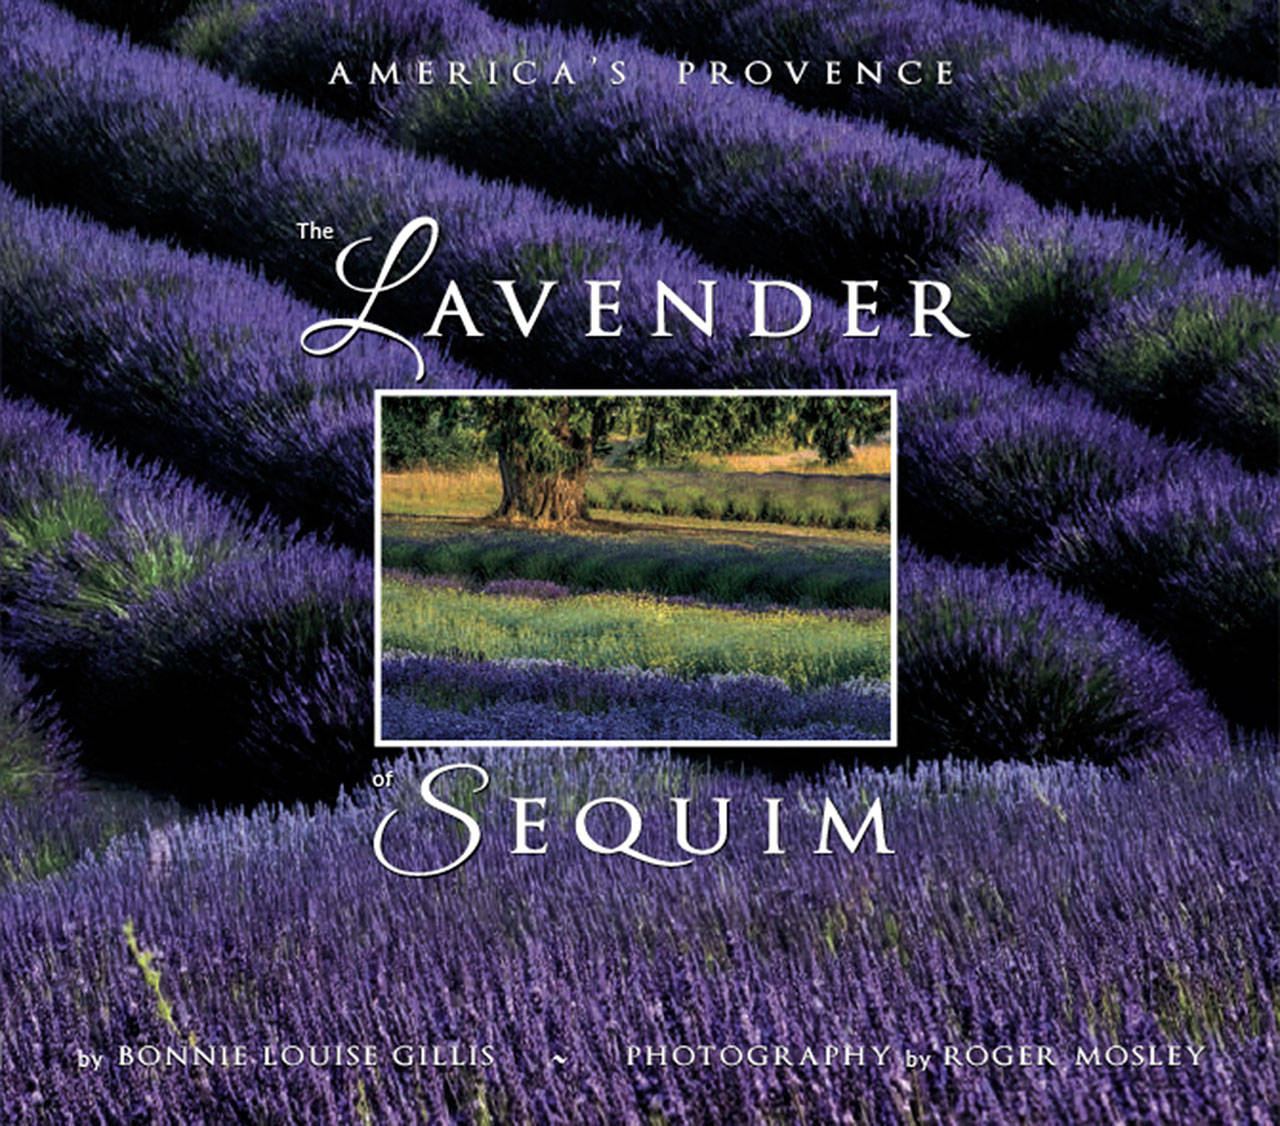 For about a year, author Bonnie Gillis has worked with local lavender farmers to create “The Lavender of Sequim: America’s Provence.” She said it’s “part garden inspiration, part lavender primer and part travel guide.” Photo courtesy of Bonnie Gillis